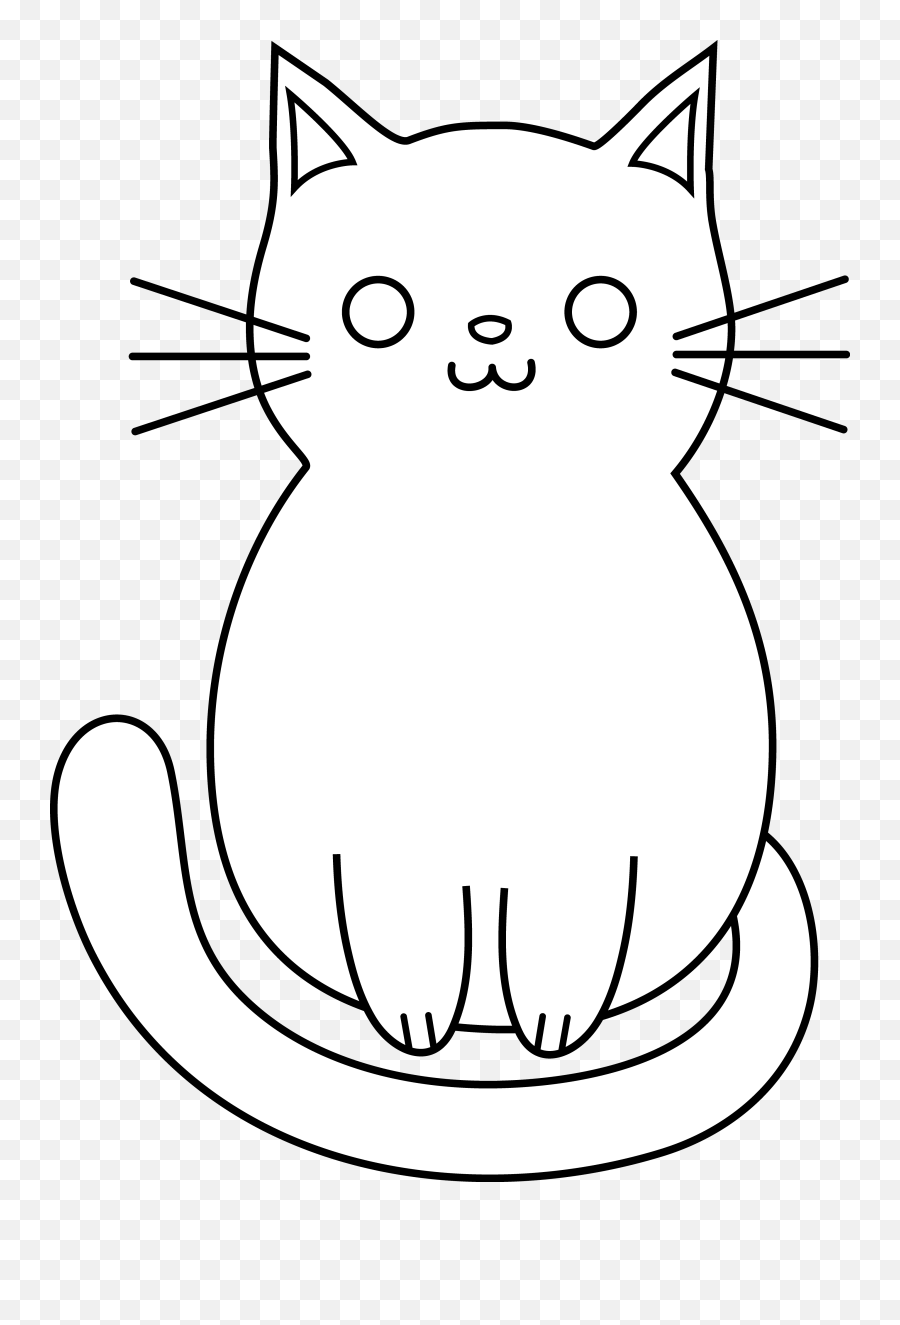 Cute Cat Clipart Free Images 2 - Simple Cat Clipart Black And White Emoji,Cat Clipart